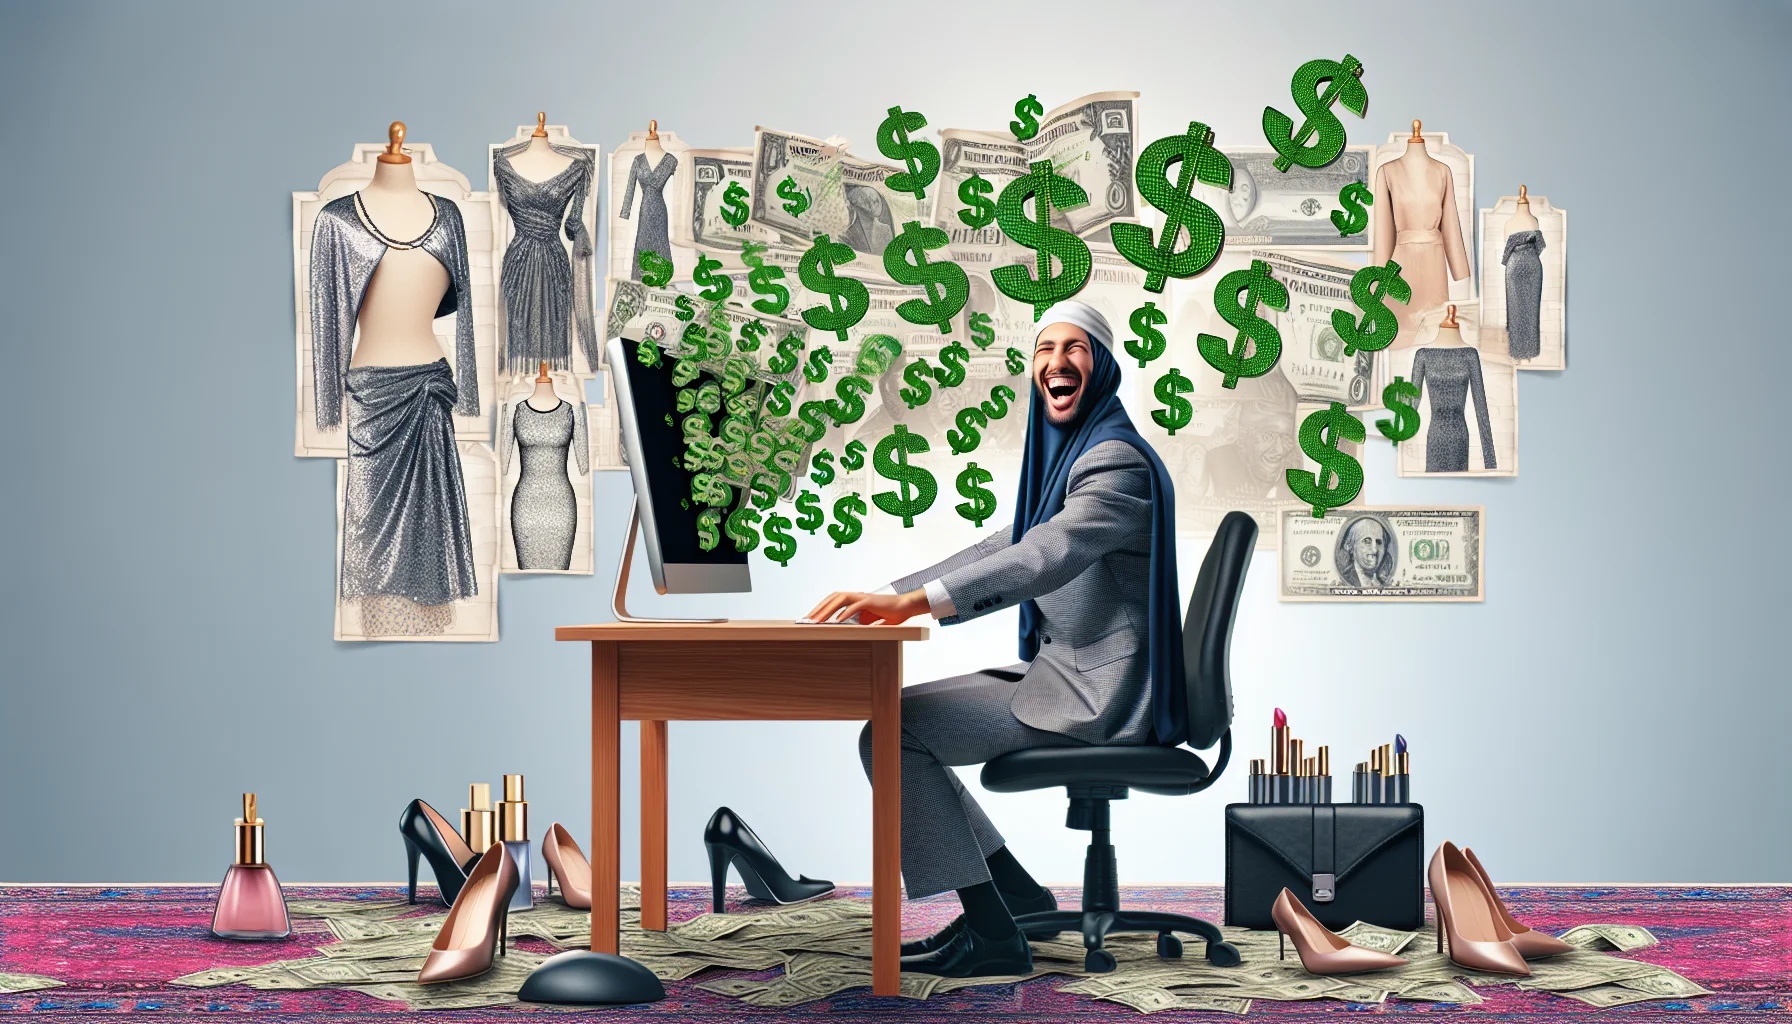 Create a humor-filled, realistic image that represents a hypothetical affiliate program for a high-end fashion brand. Showcase the enticing opportunity of earning money online. This scene could include a person of Middle Eastern descent sitting at a computer with dollar signs popping out of the screen. The person is laughing joyfully as more and more dollar symbols whizz out from the monitor. Behind the person serve symbolic representations of fashion, such as haute couture dress sketches, elegant high heels, and perfume bottles, implying the nature of the hypothetical affiliate program. Remember to maintain the sense of realism.